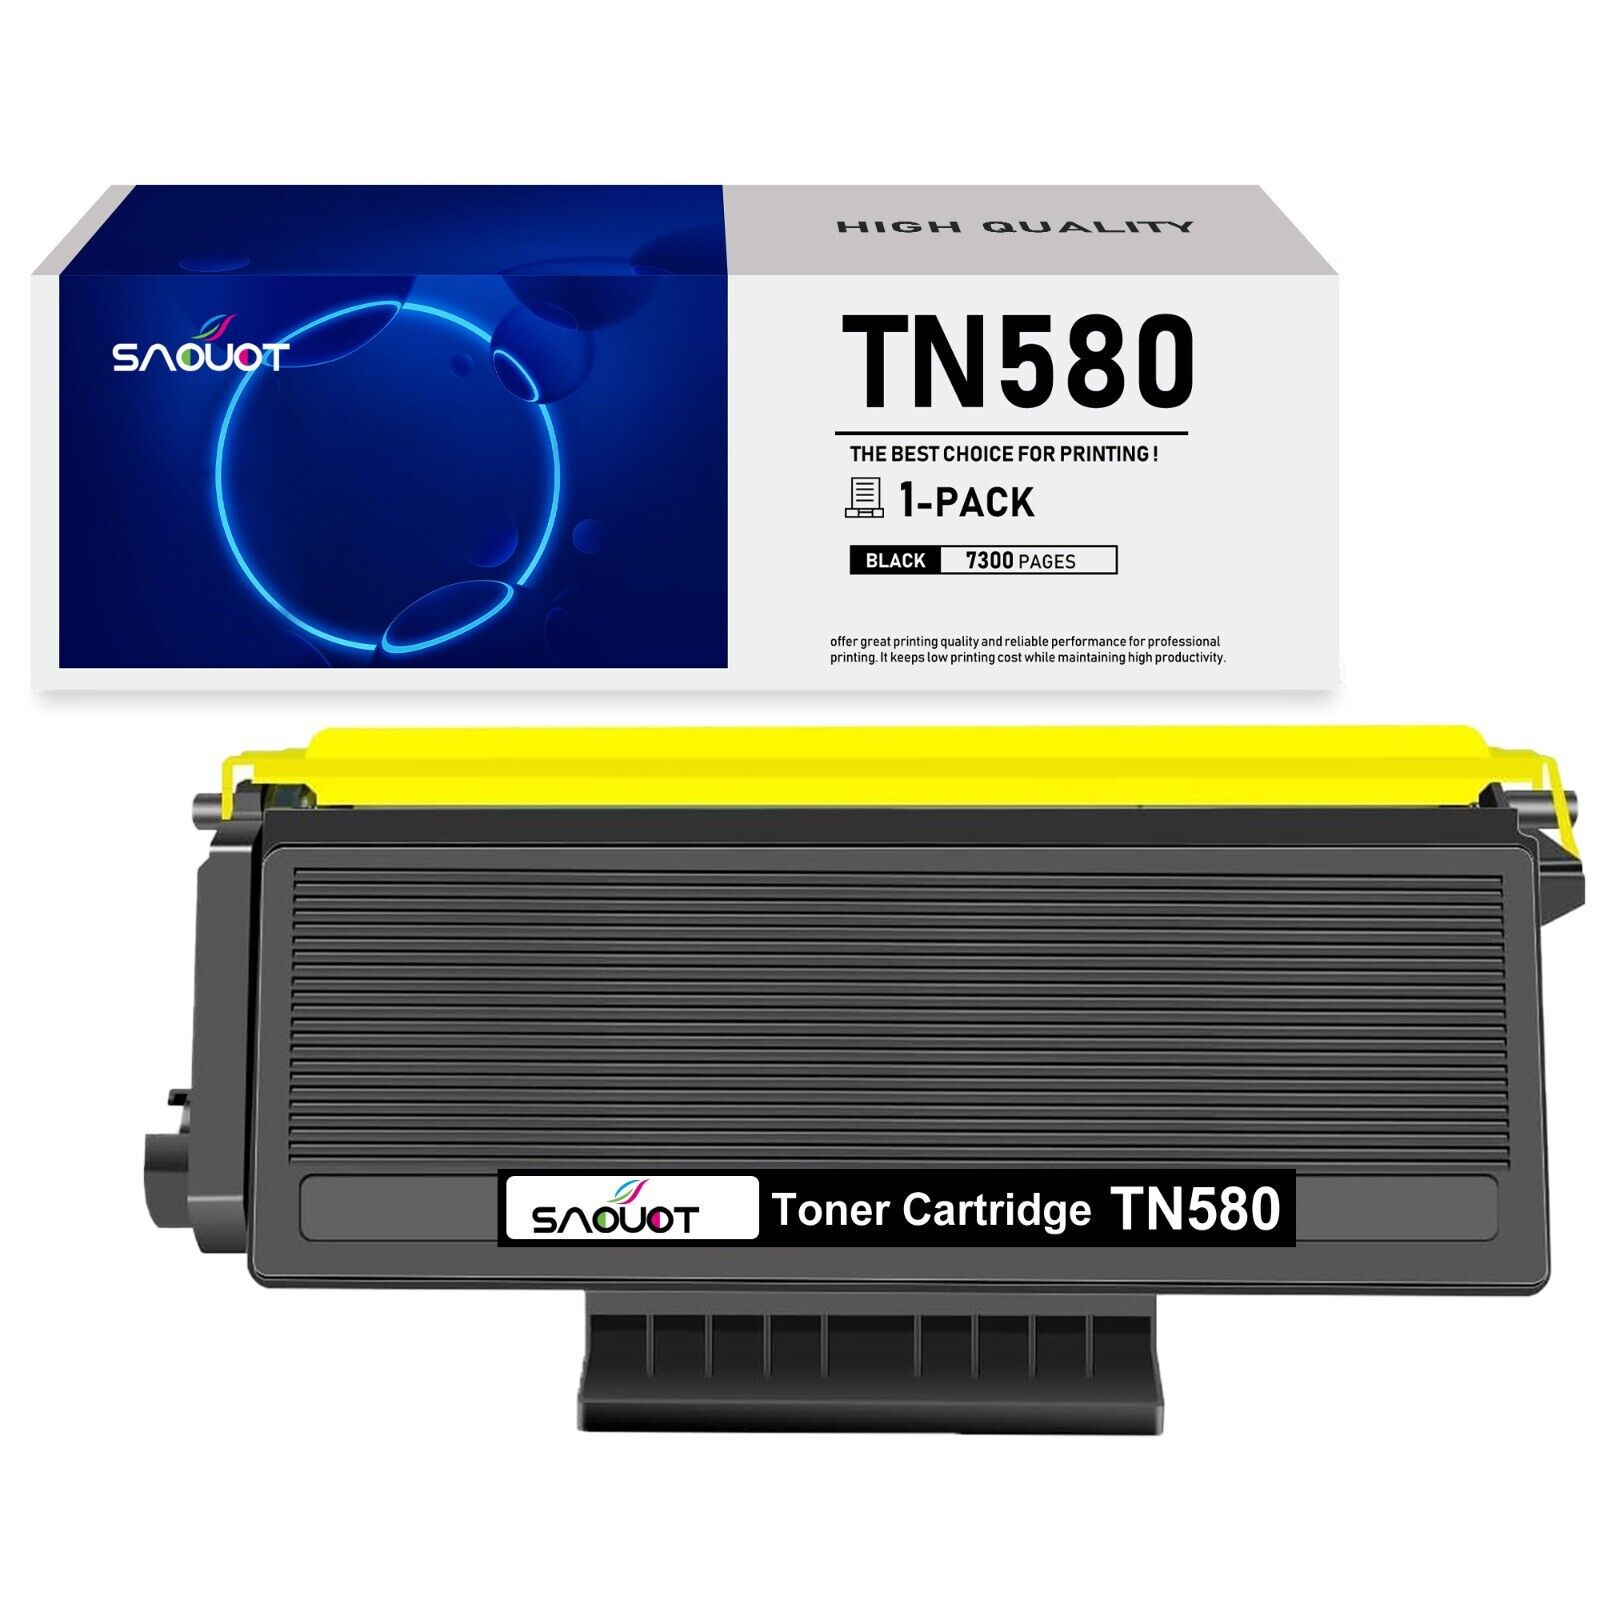 TN580 Toner Replacement for Brother DCP-8060 8065DN MFC-8460N HL-5240 5240L